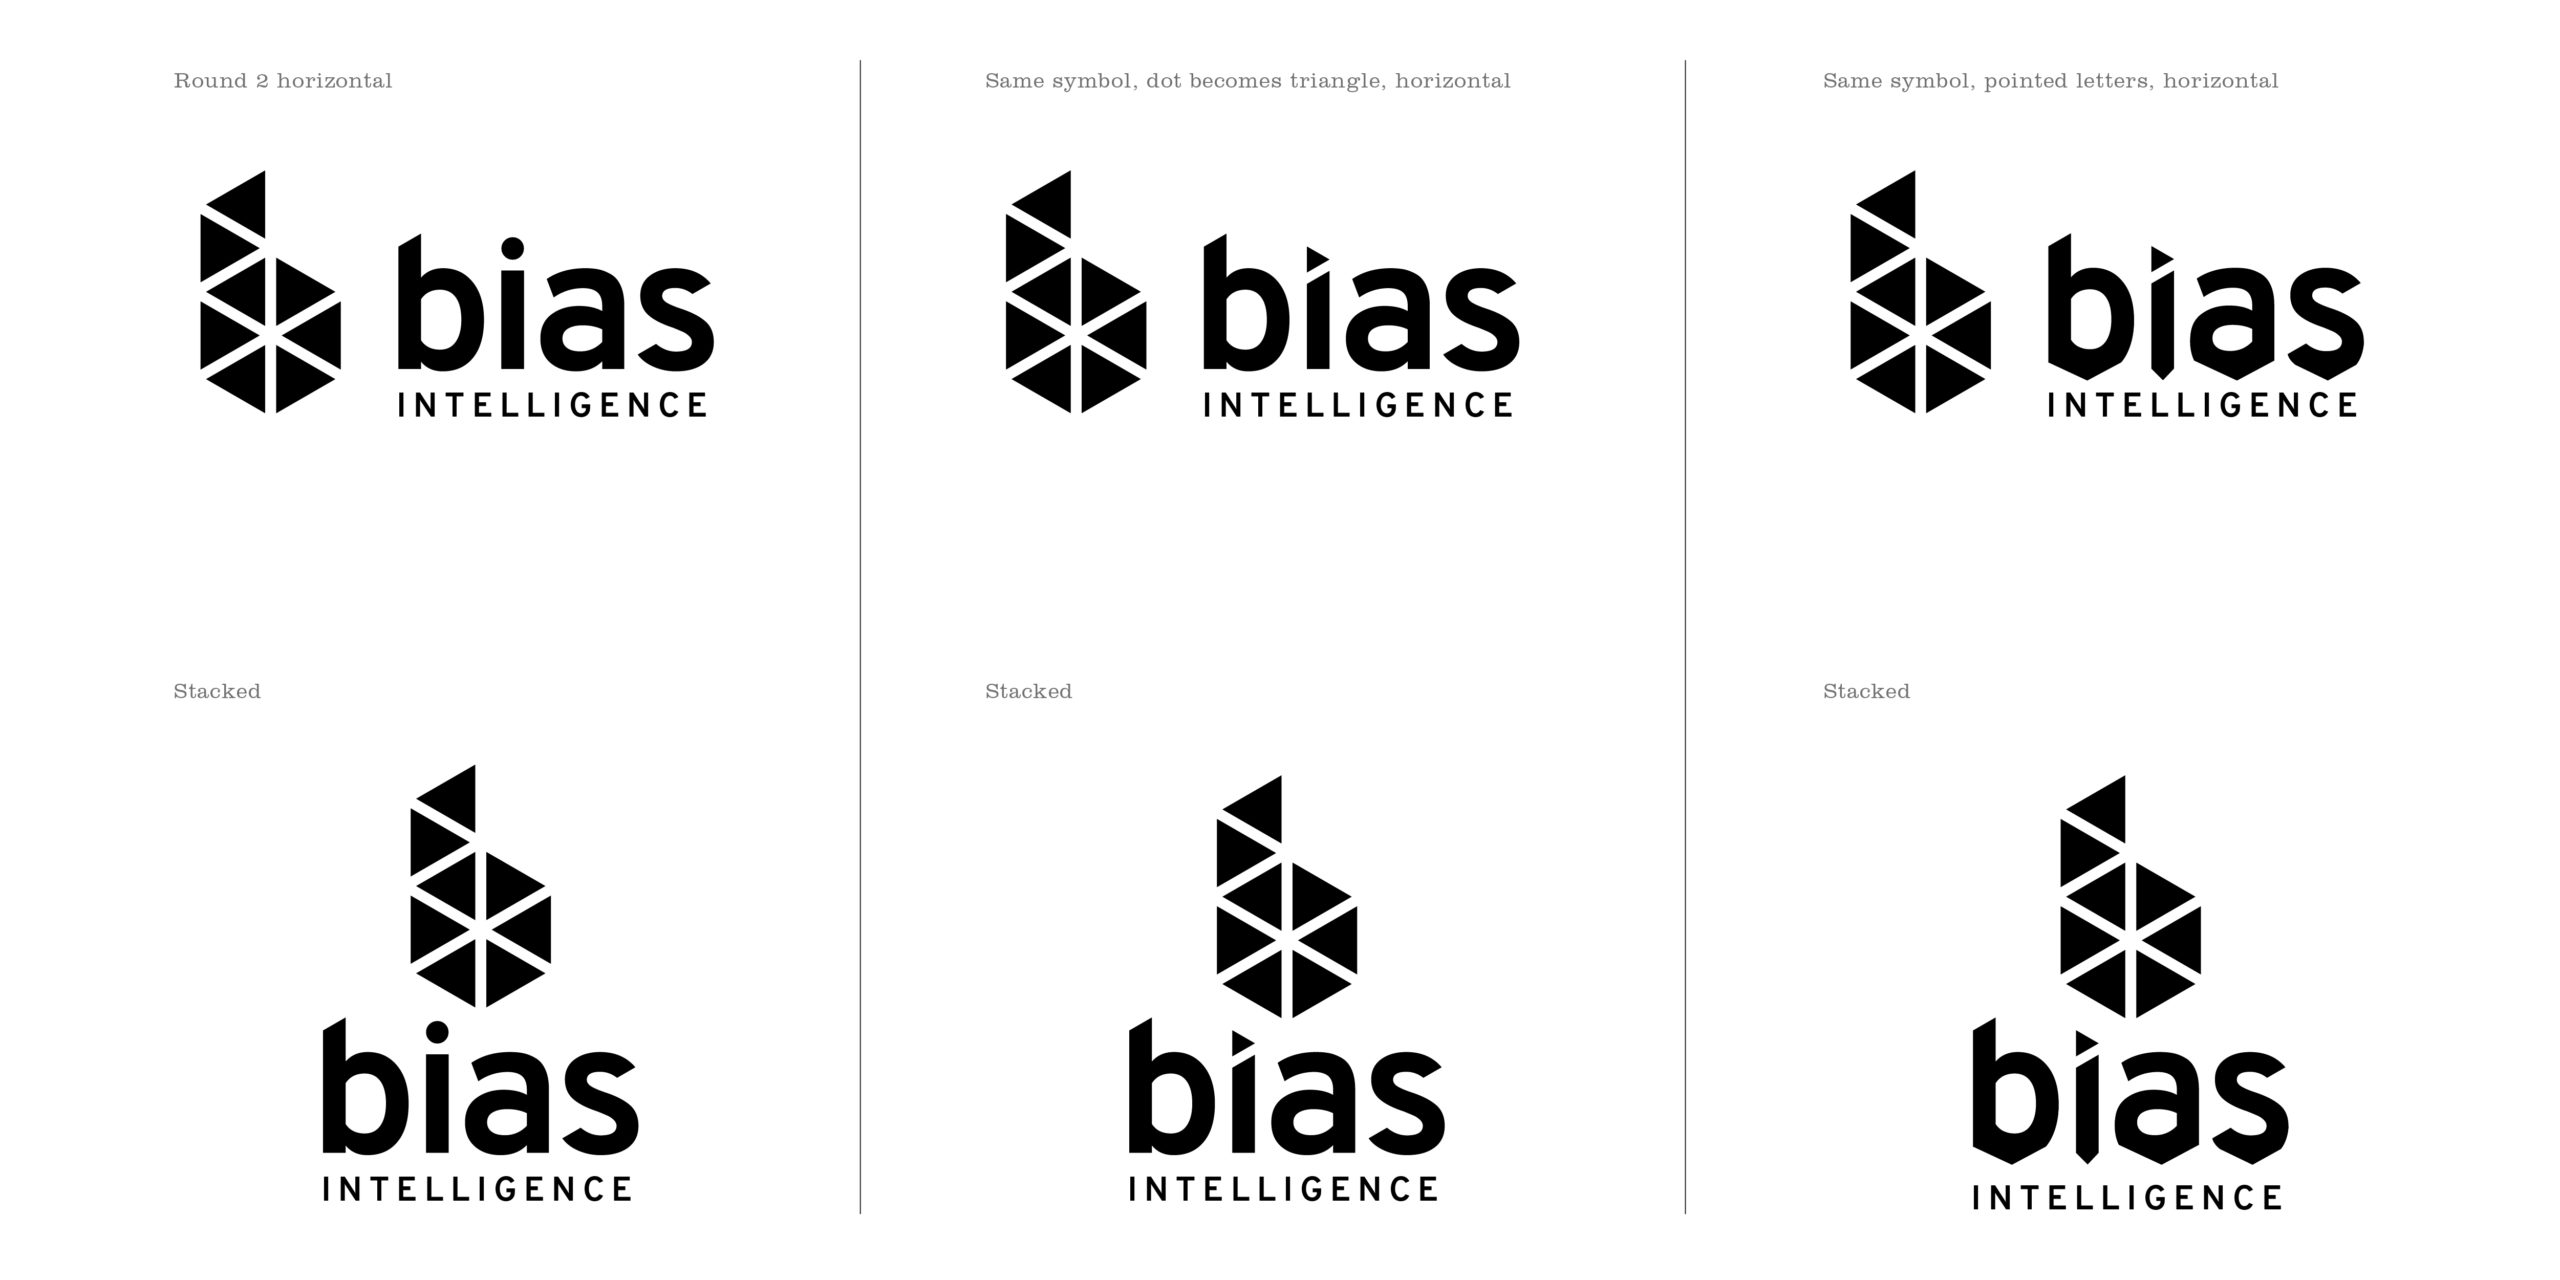 varying styles of a single logo of an abstract "b"